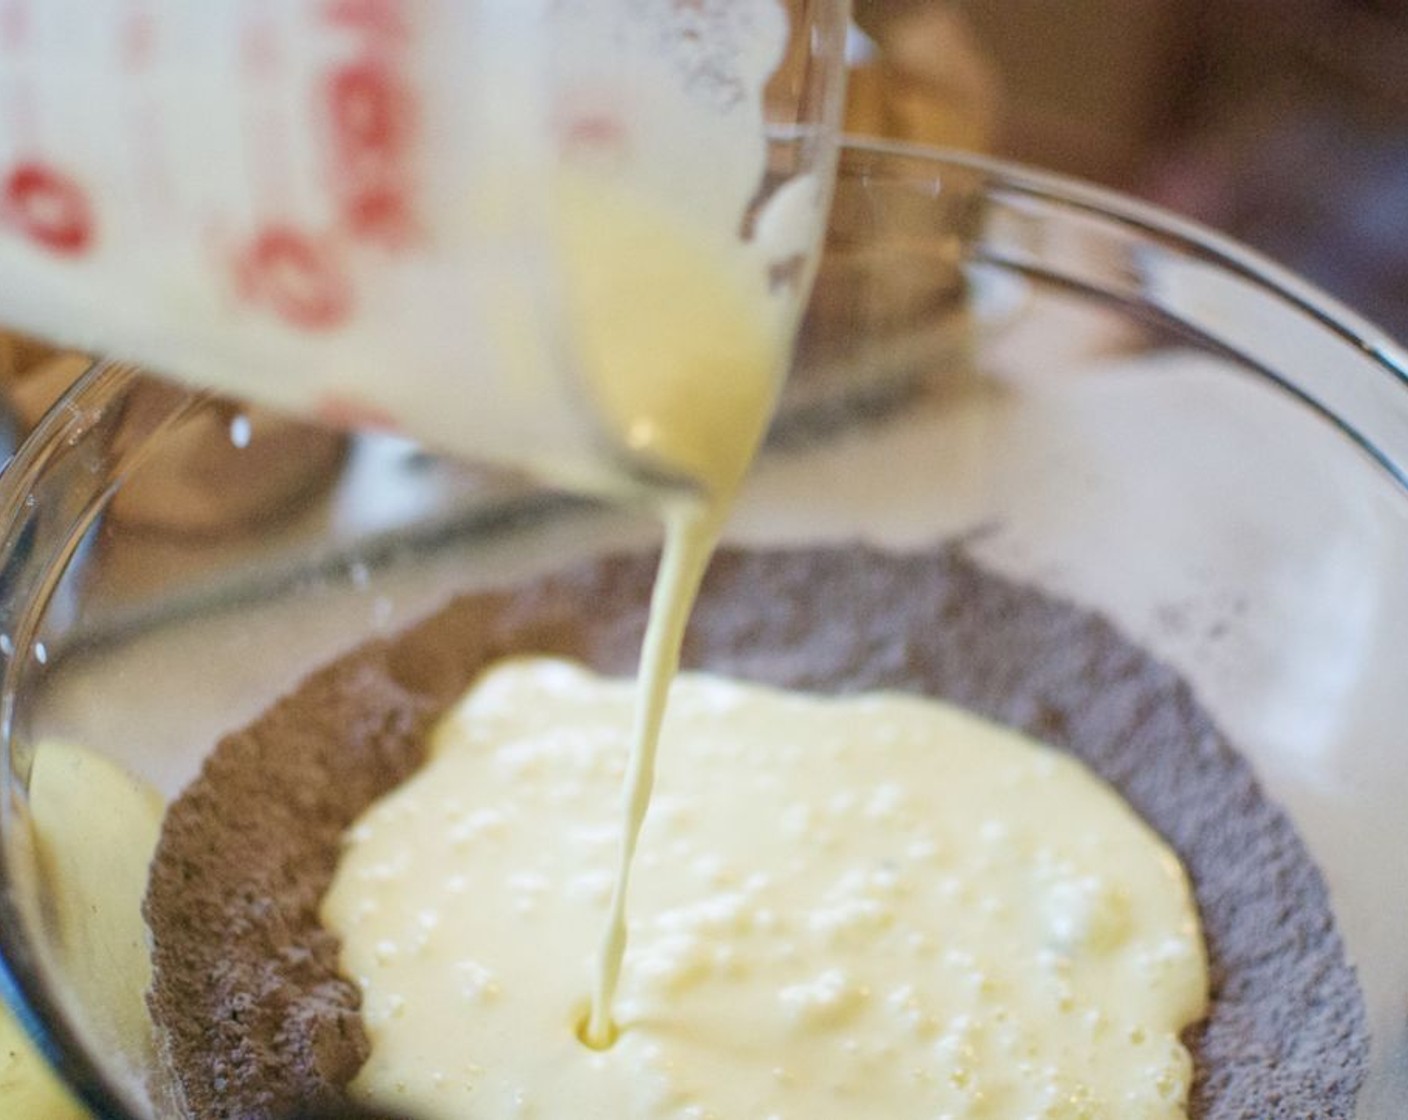 step 3 In a 2-cup measure whisk together Buttermilk (2/3 cup), Sour Cream (1/2 cup), Farmhouse Eggs® Large Brown Eggs (2), and Butter (3 Tbsp). Add all at once to the flour mixture. Gently stir just until moistened, batter should be lumpy.